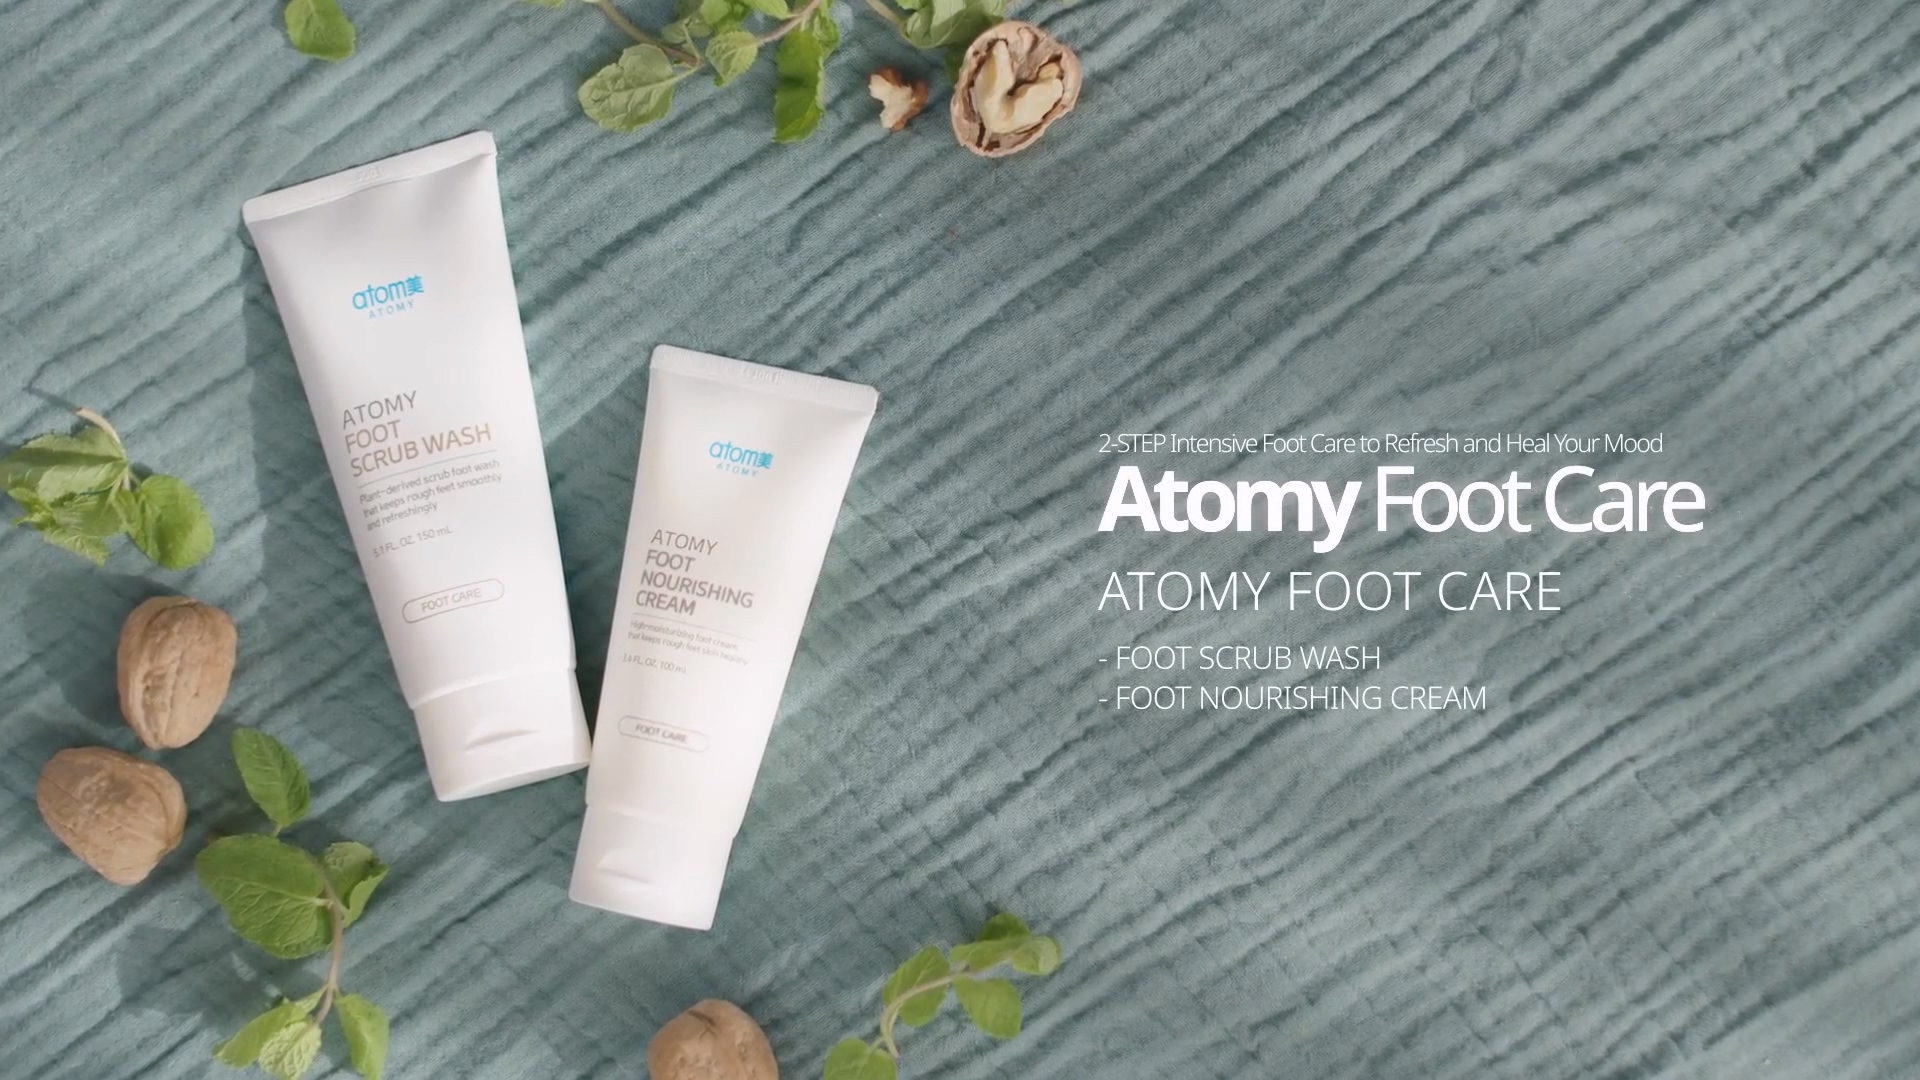 Atomy Foot Care introduction video